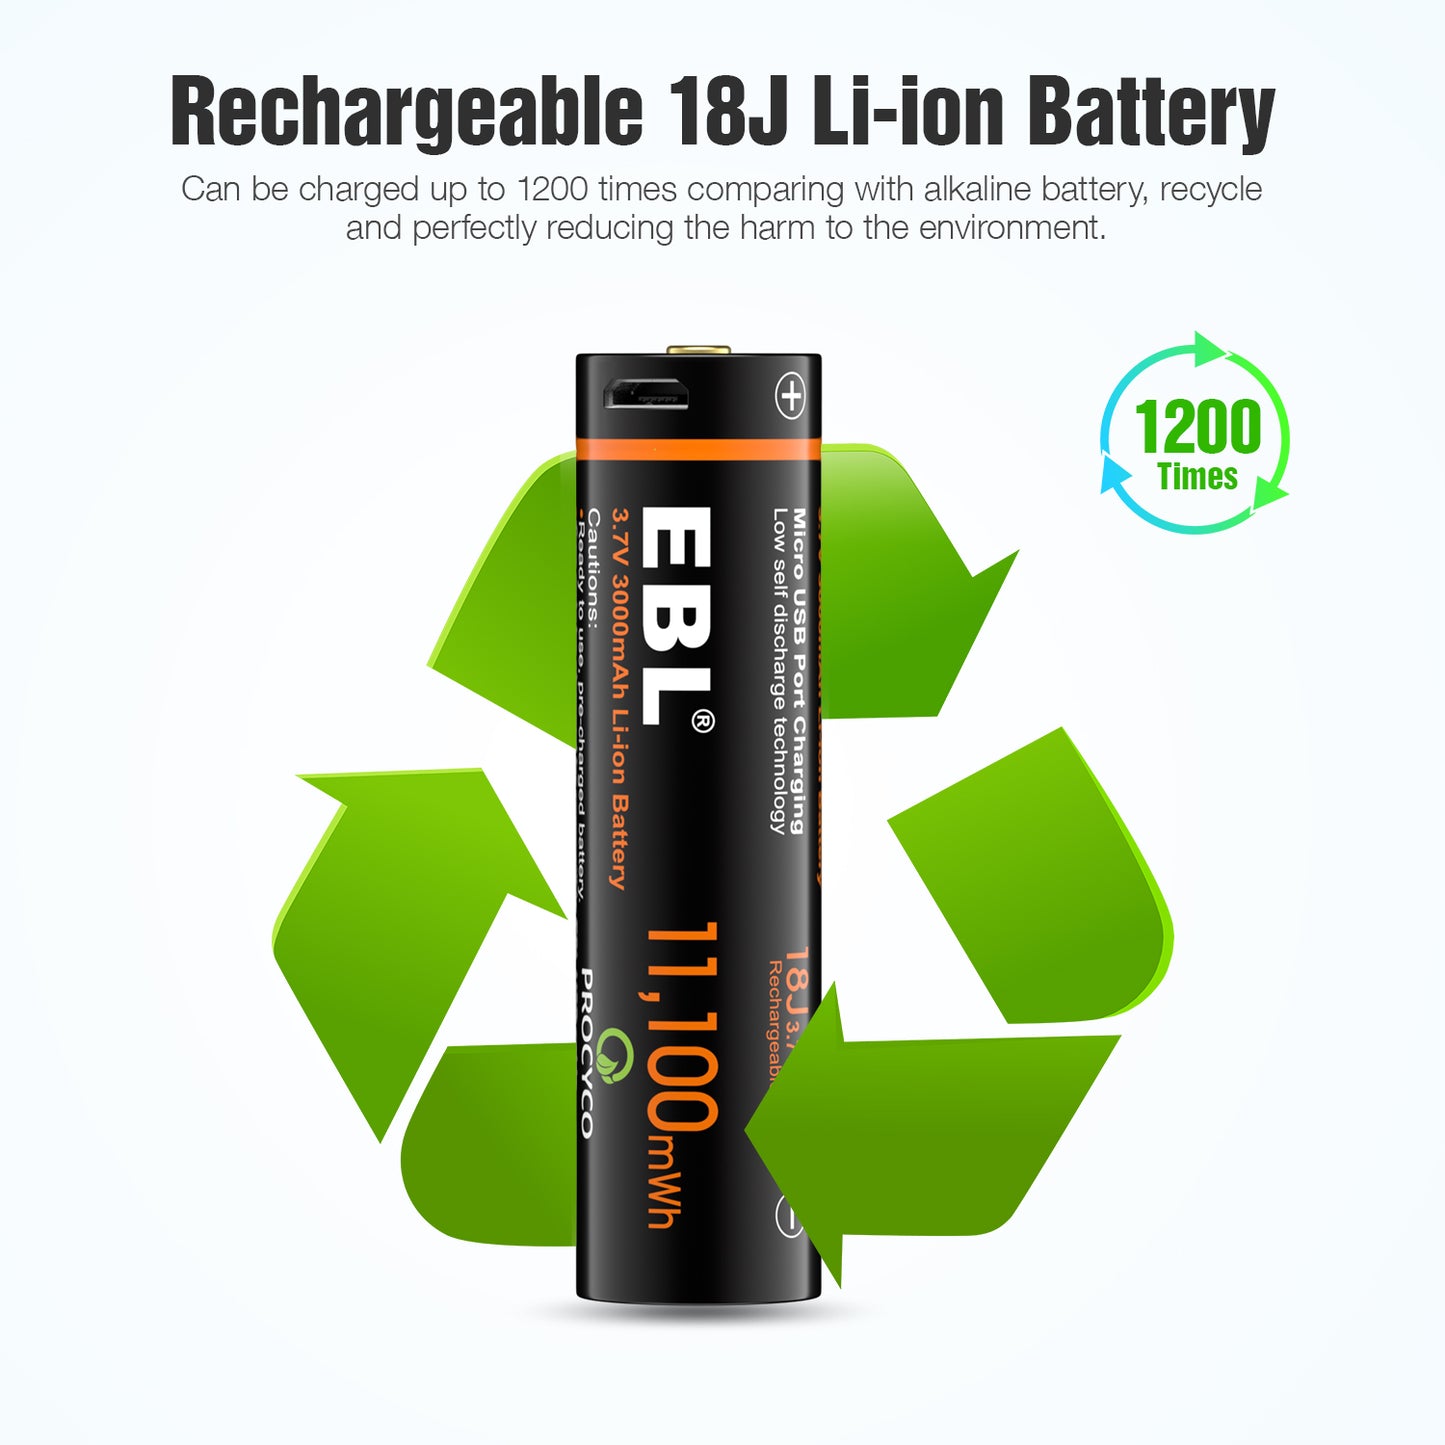 EBL TB-1446 3.7V 18650 3000mAh High-Performance Rechargeable Li-Ion Lithium Ion Battery with Built-In Micro USB Charging Port for Portable and Emergency Electronics